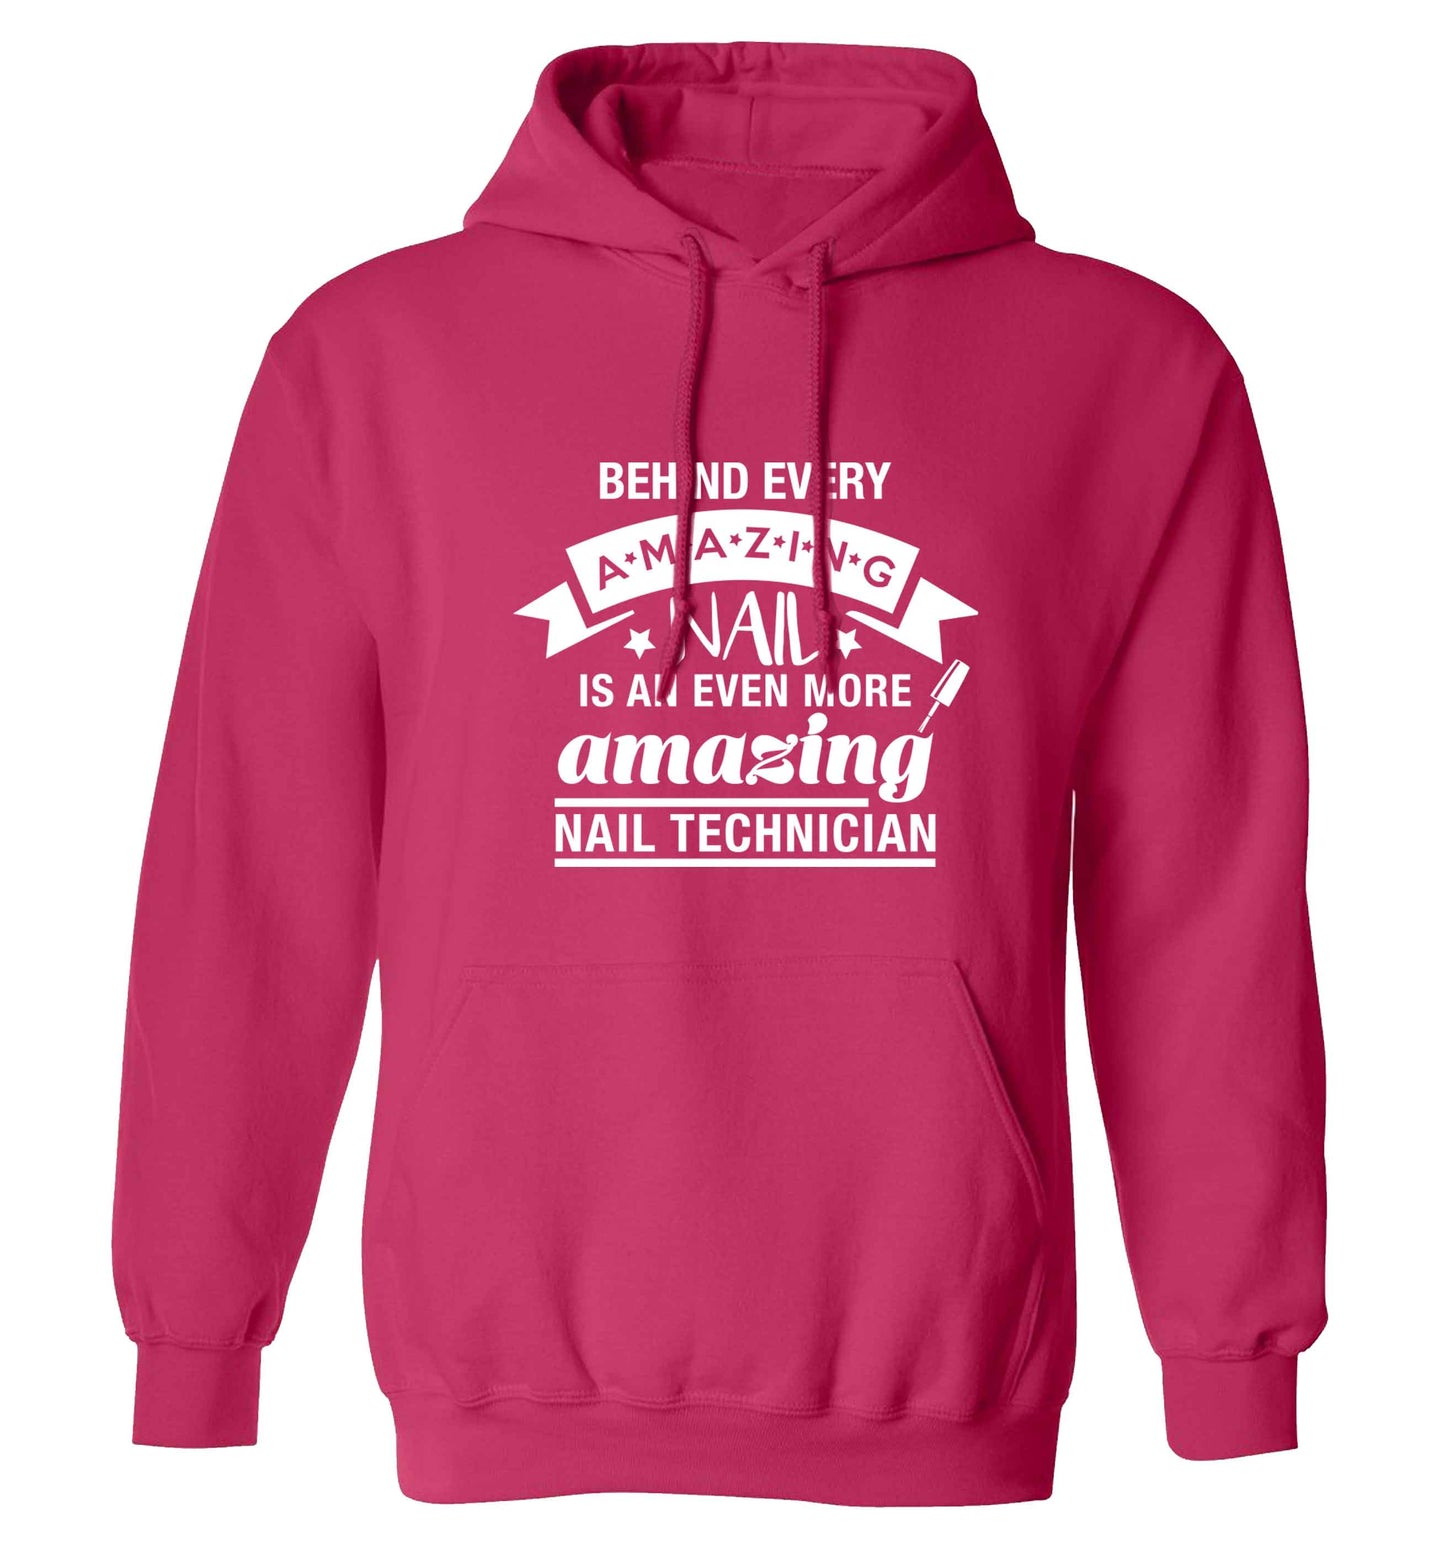 Behind every amazing nail is an even more amazing nail technician adults unisex pink hoodie 2XL